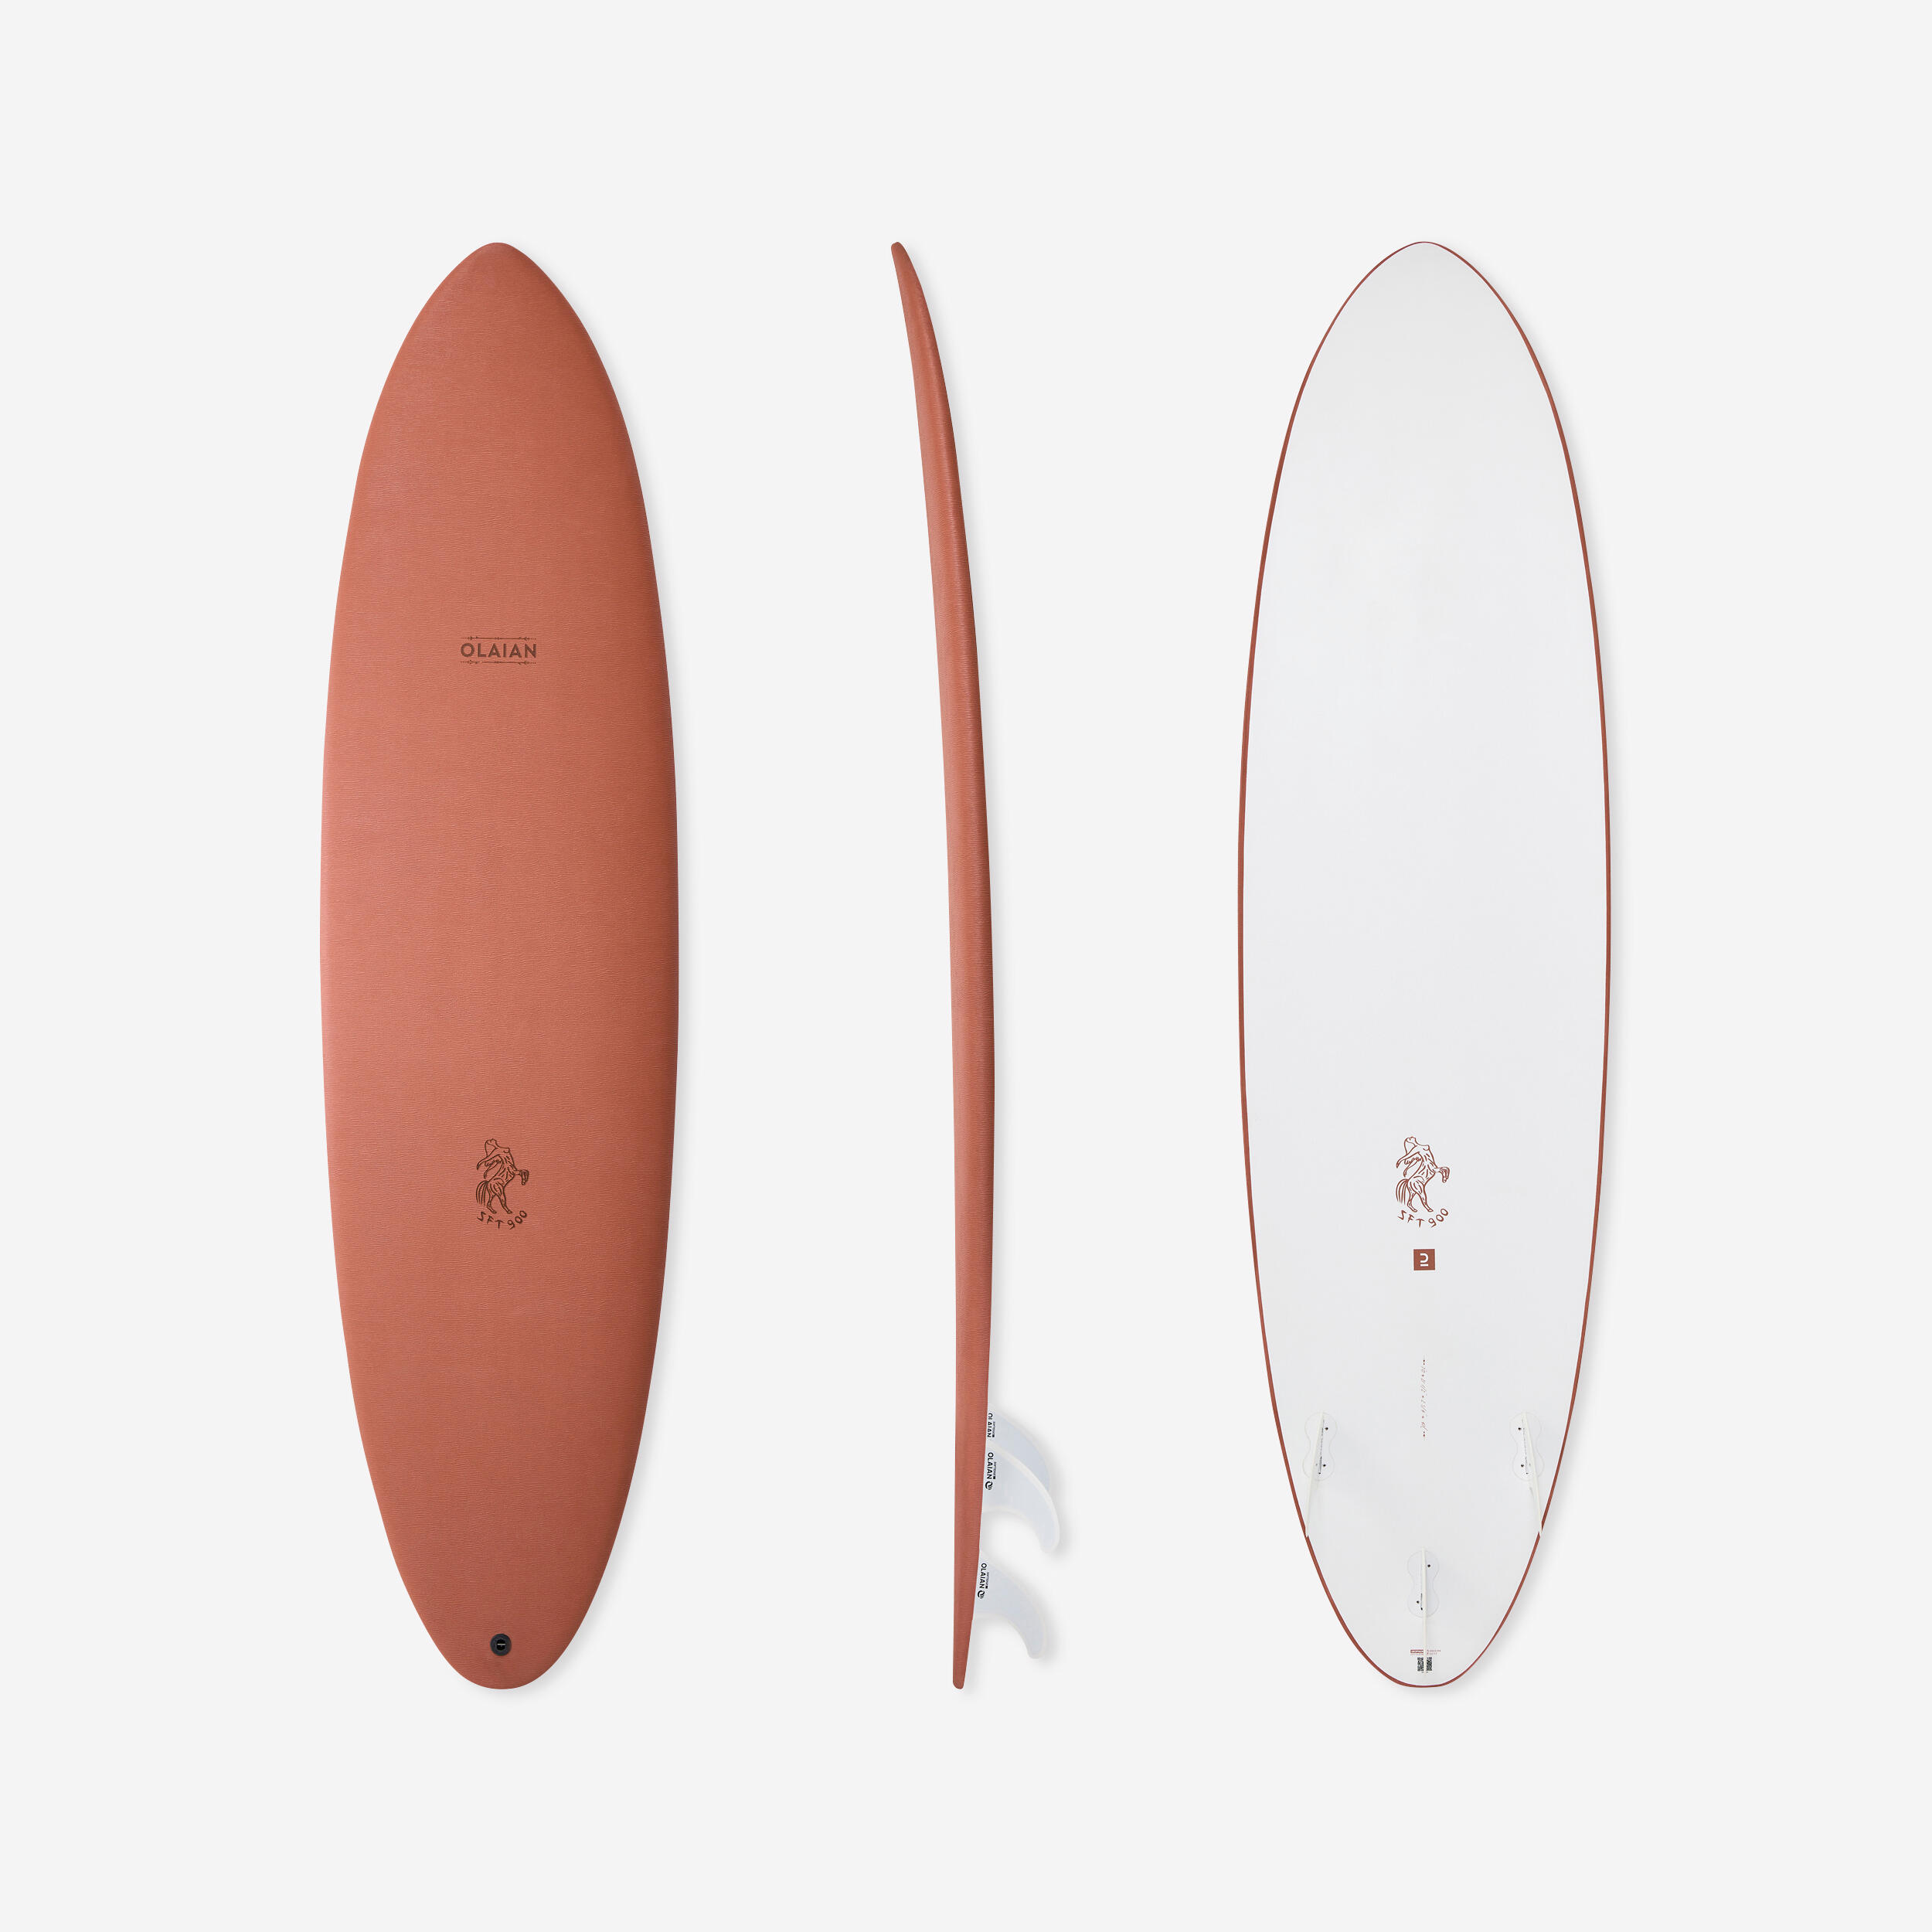 OLAIAN SURFBOARD 900 EPOXY SOFT 7' with 3 fins